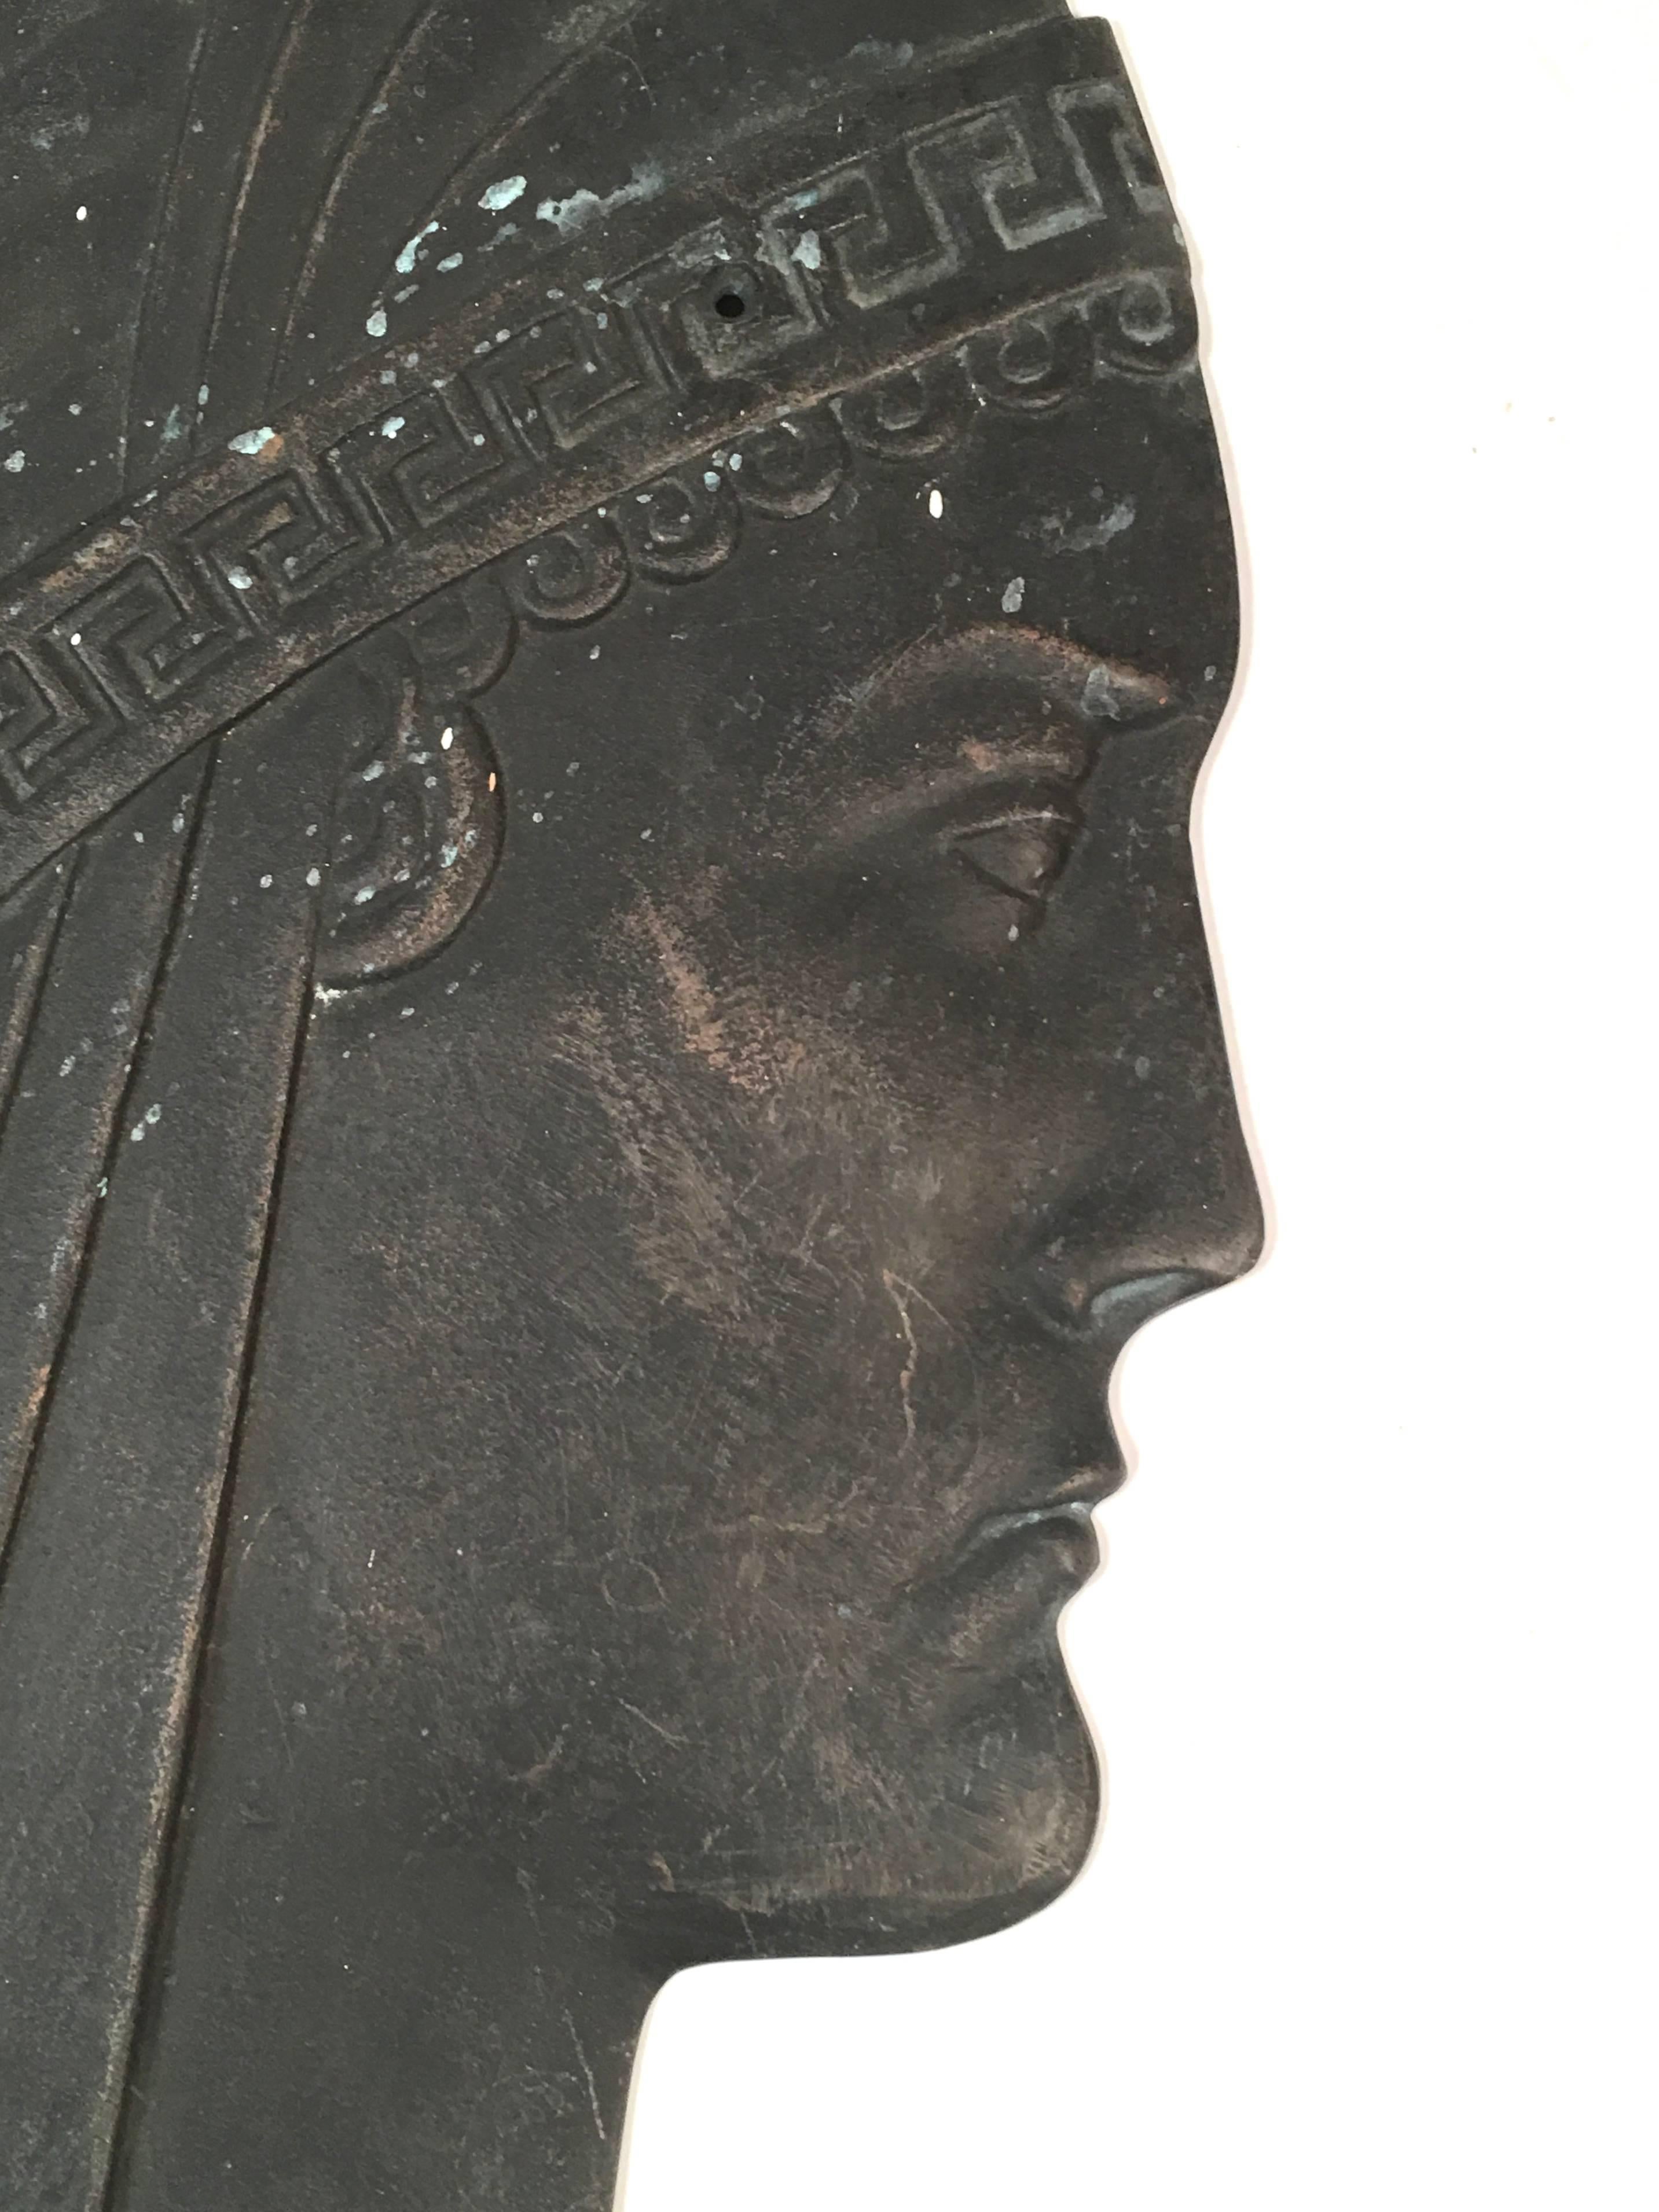 An Art Deco period cast iron neoclassical style head of a Grecian woman, in bas relief, likely an architectural ornament or wall decoration from a Hollywood Regency interior in black cast iron, the woman's head with stylized features, a Greek key